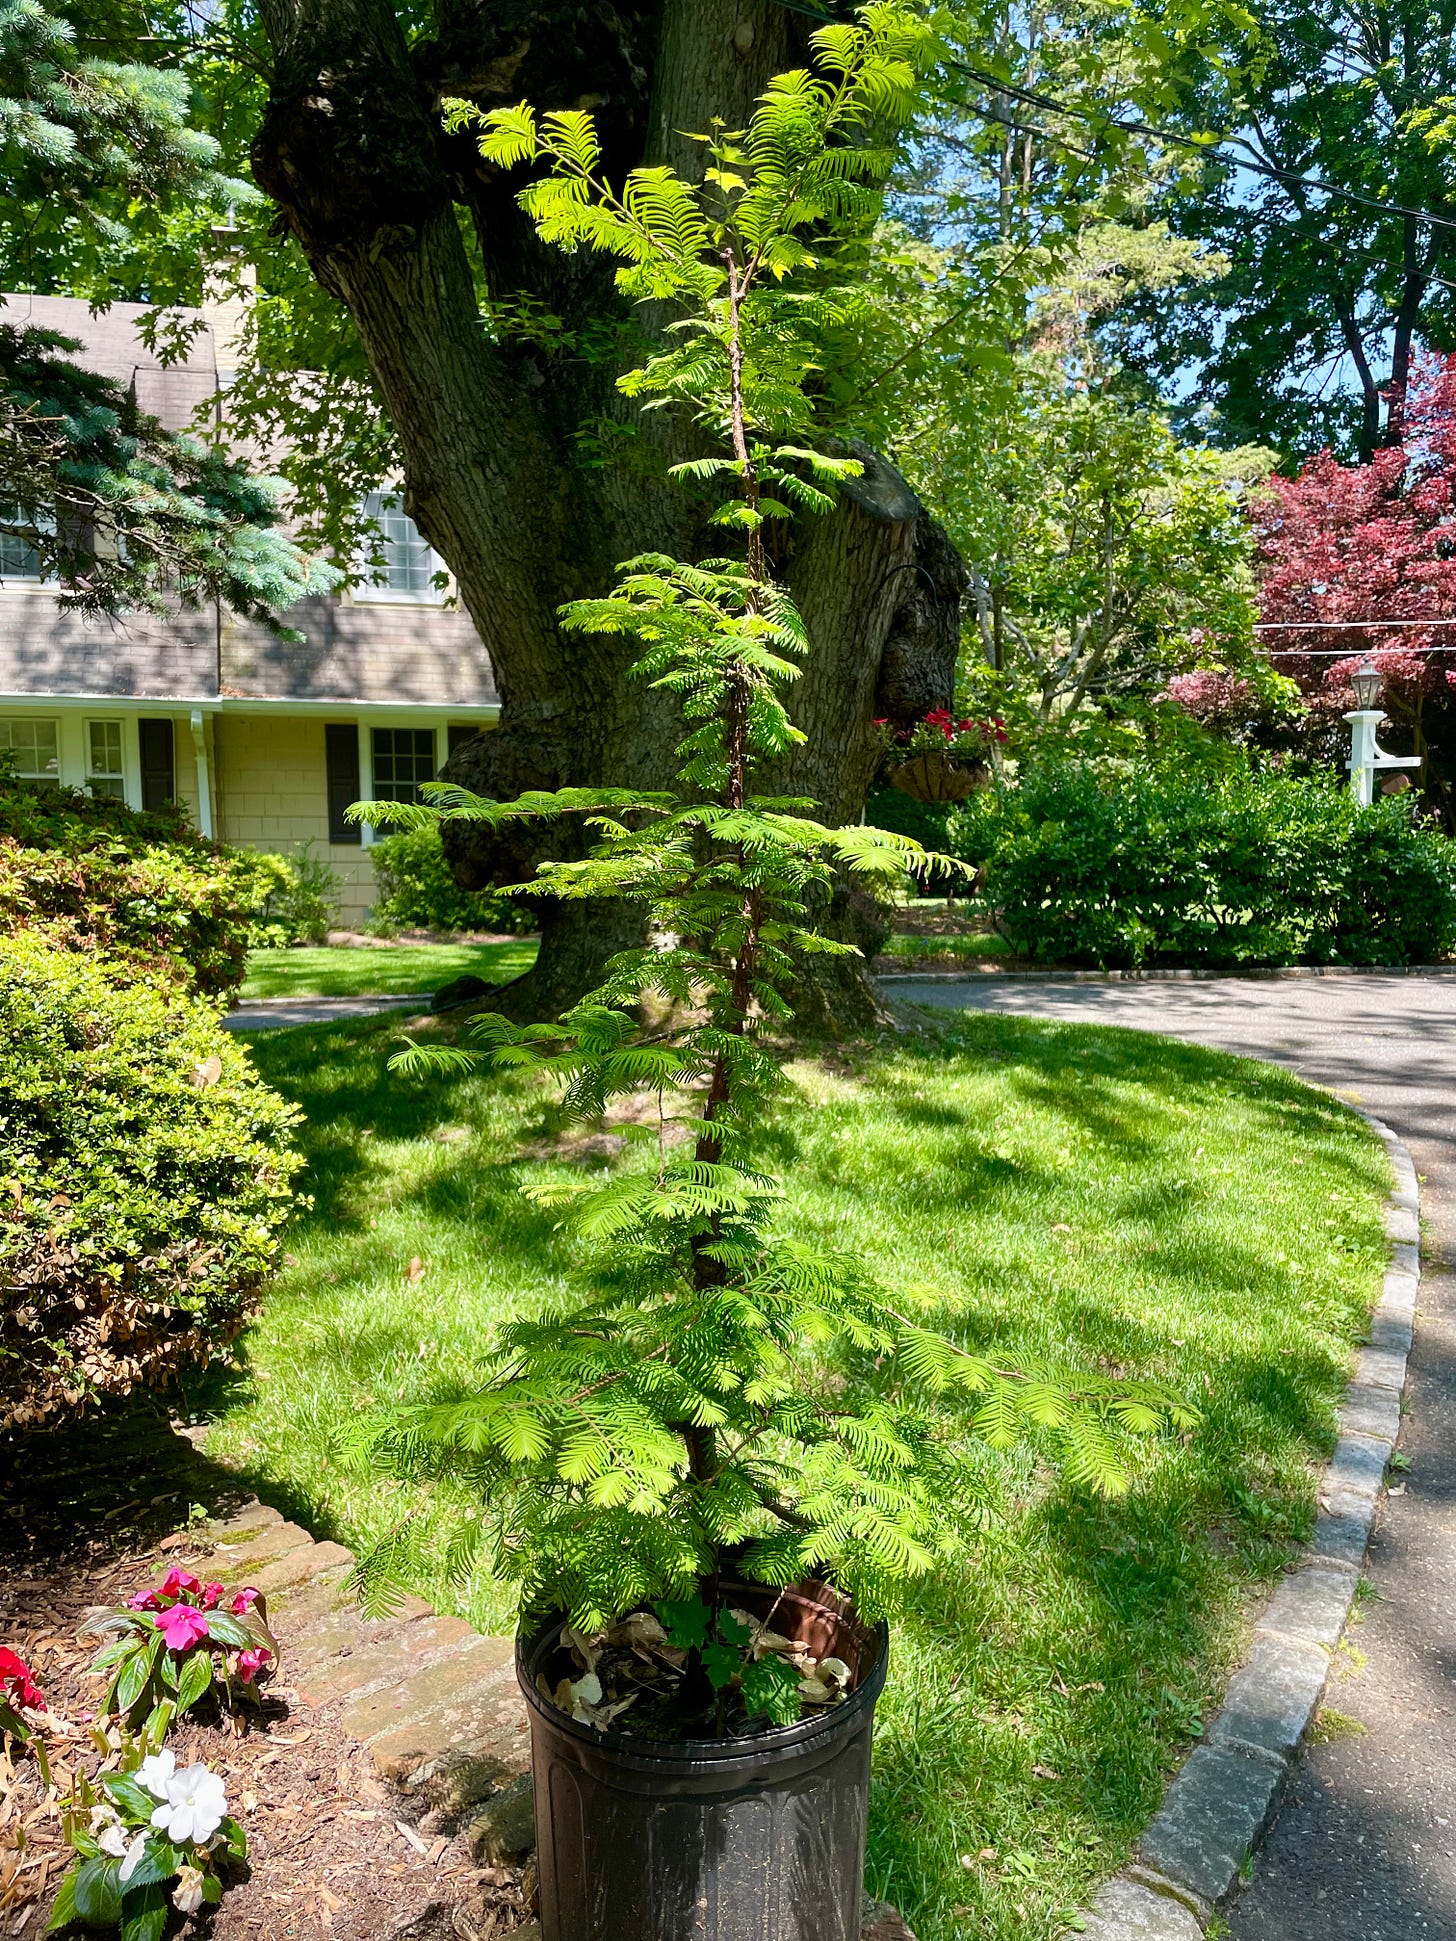 ID: Dawn redwood tree in a 3 gallon black nursery pot on a sunny suburban lawn, with lots of feathery foliage and a tall twisted trunk